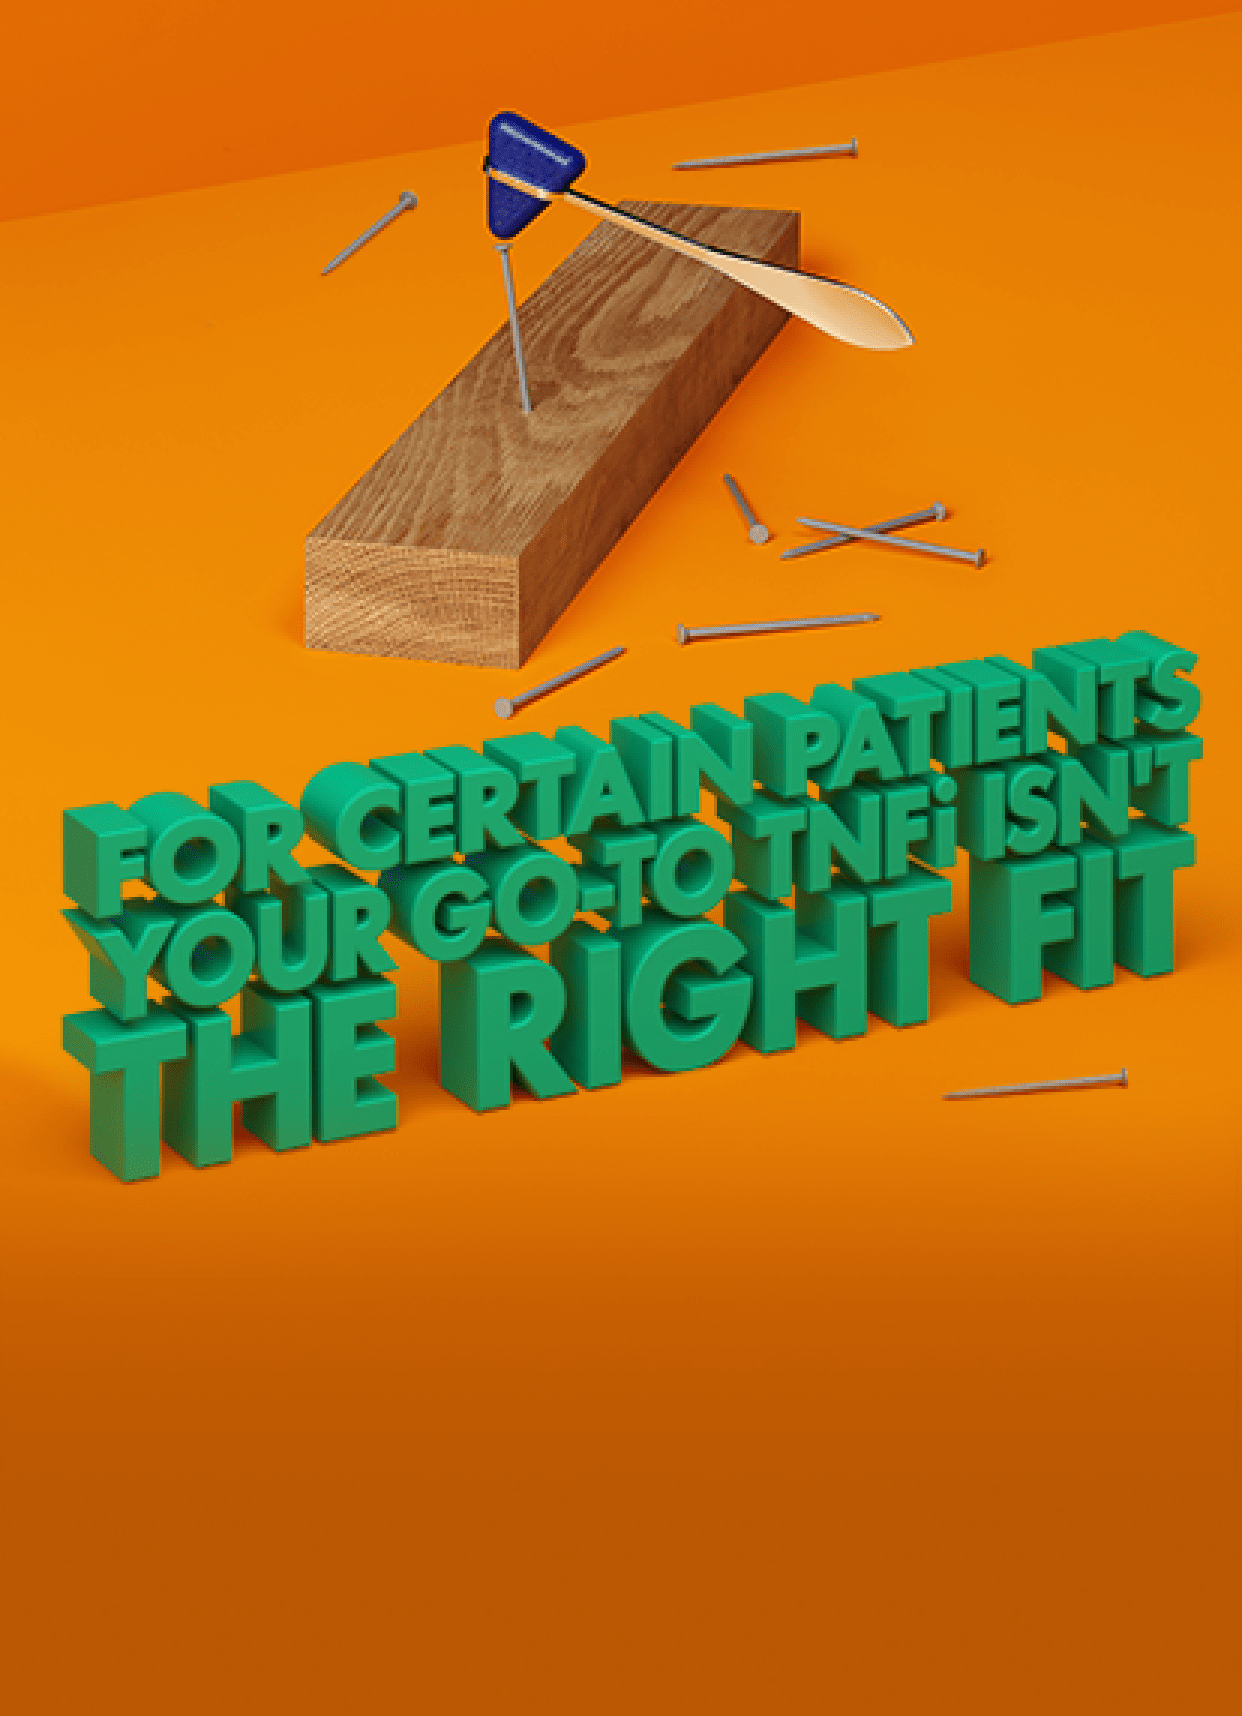 Reflex hammer hitting a nail in a board with an orange background